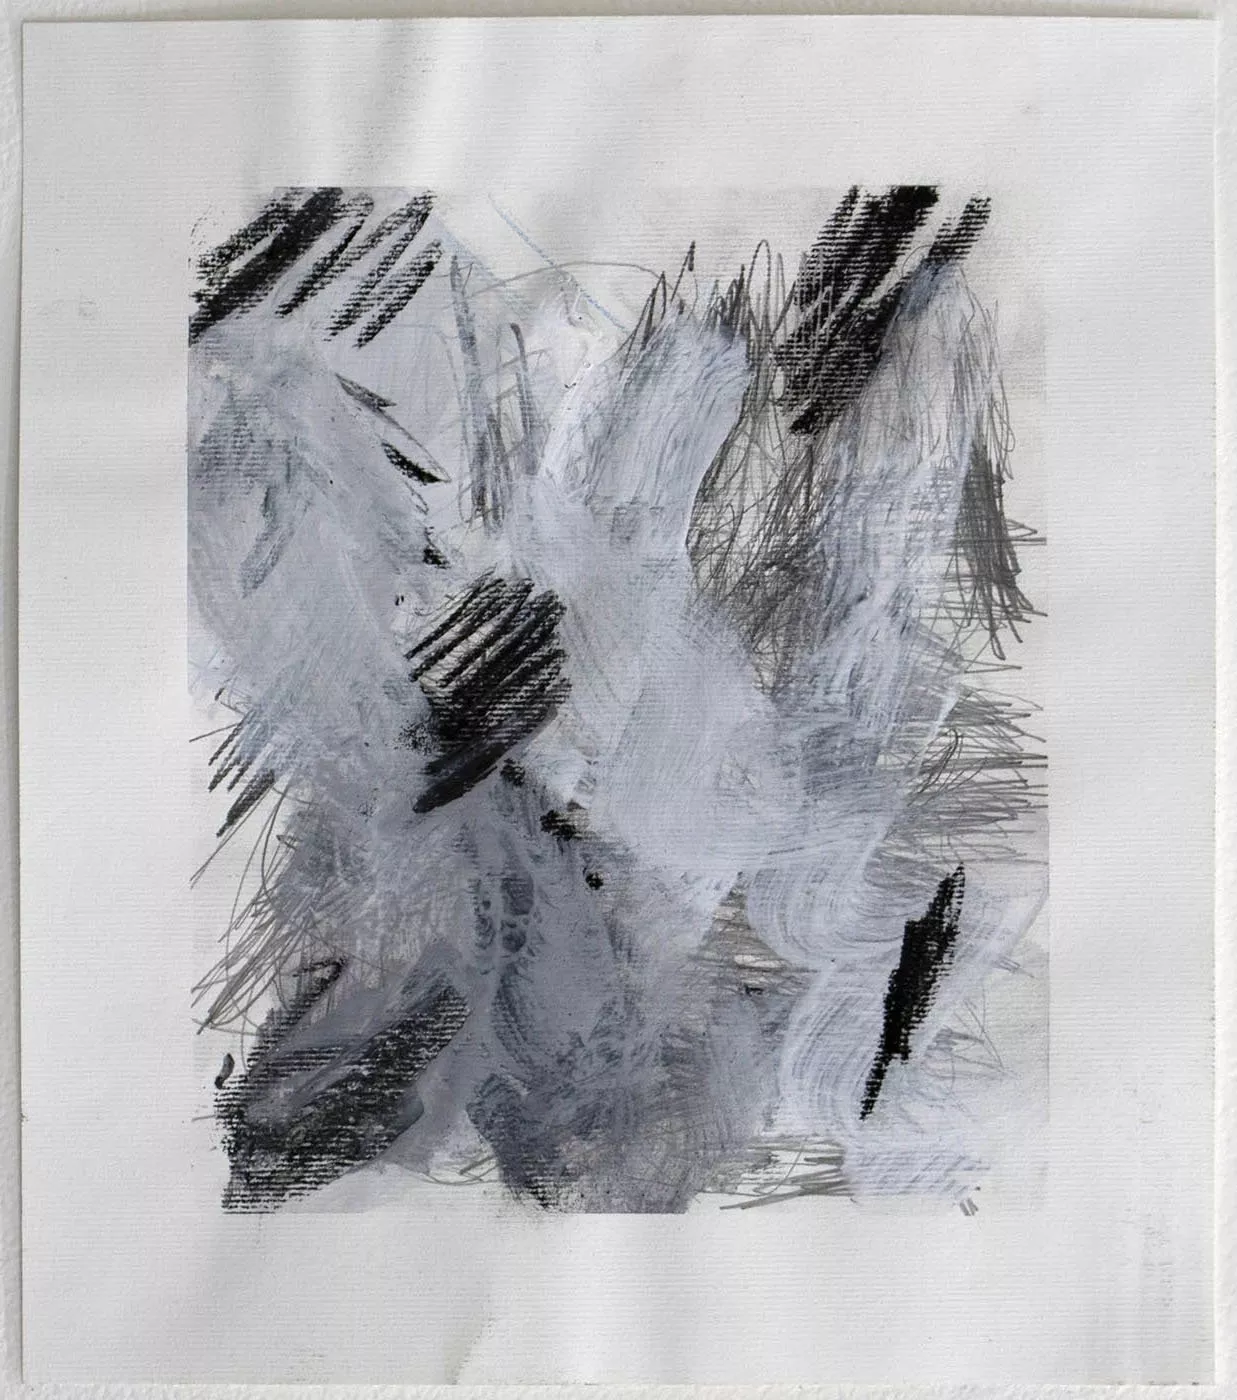 Lara Patt Untitled (Image 2), 2017 Artwork is abstract and includes white, gray and black marks on white paper.  Mixed media on panel, 18” x 14”